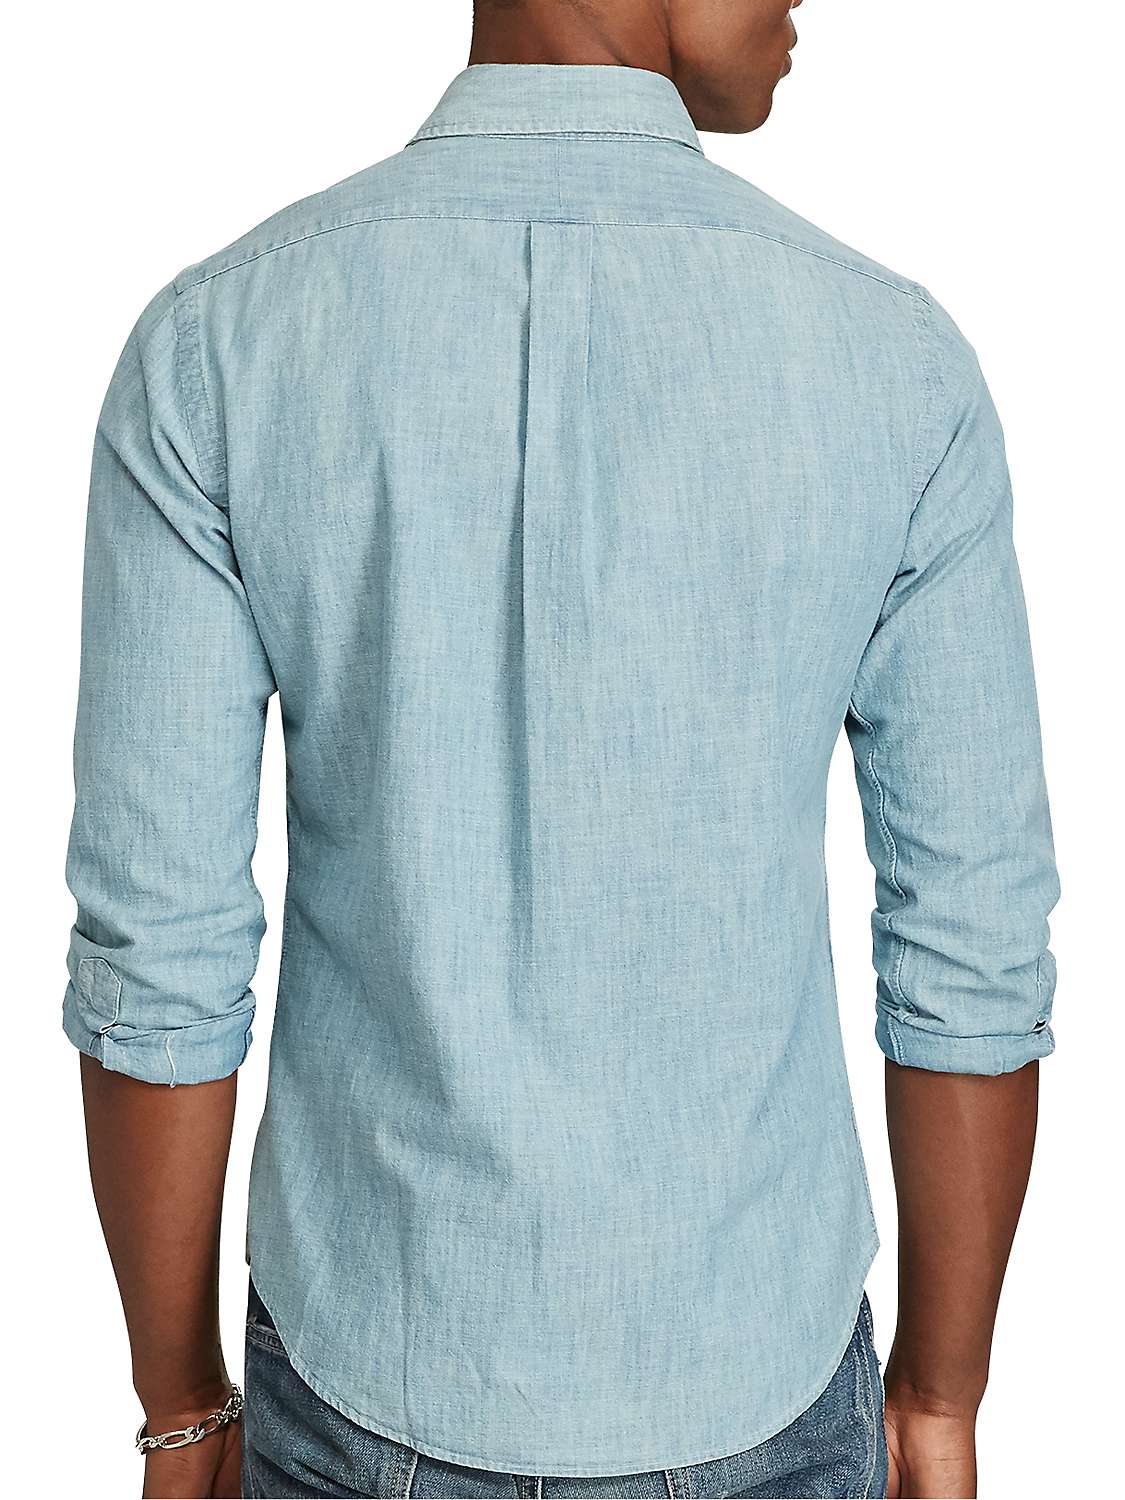 Buy Polo Ralph Lauren Chambray Slim Fit Shirt, Chambray Online at johnlewis.com